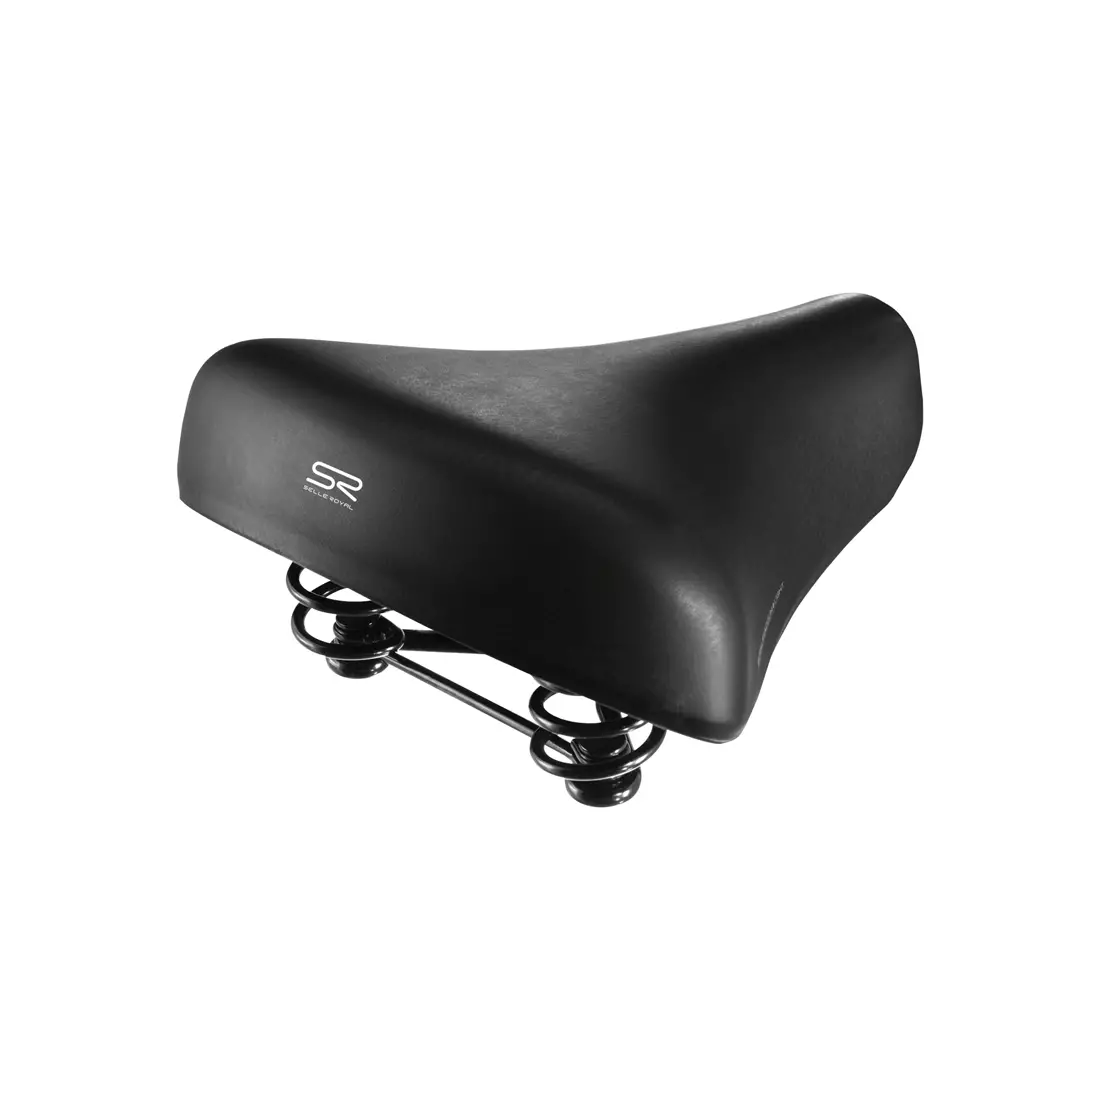 Bicycle saddle SELLEROYAL CLASSIC RELAXED 90st. HOLLAND unisex + springs sp (DWZ) SR-8261A58067